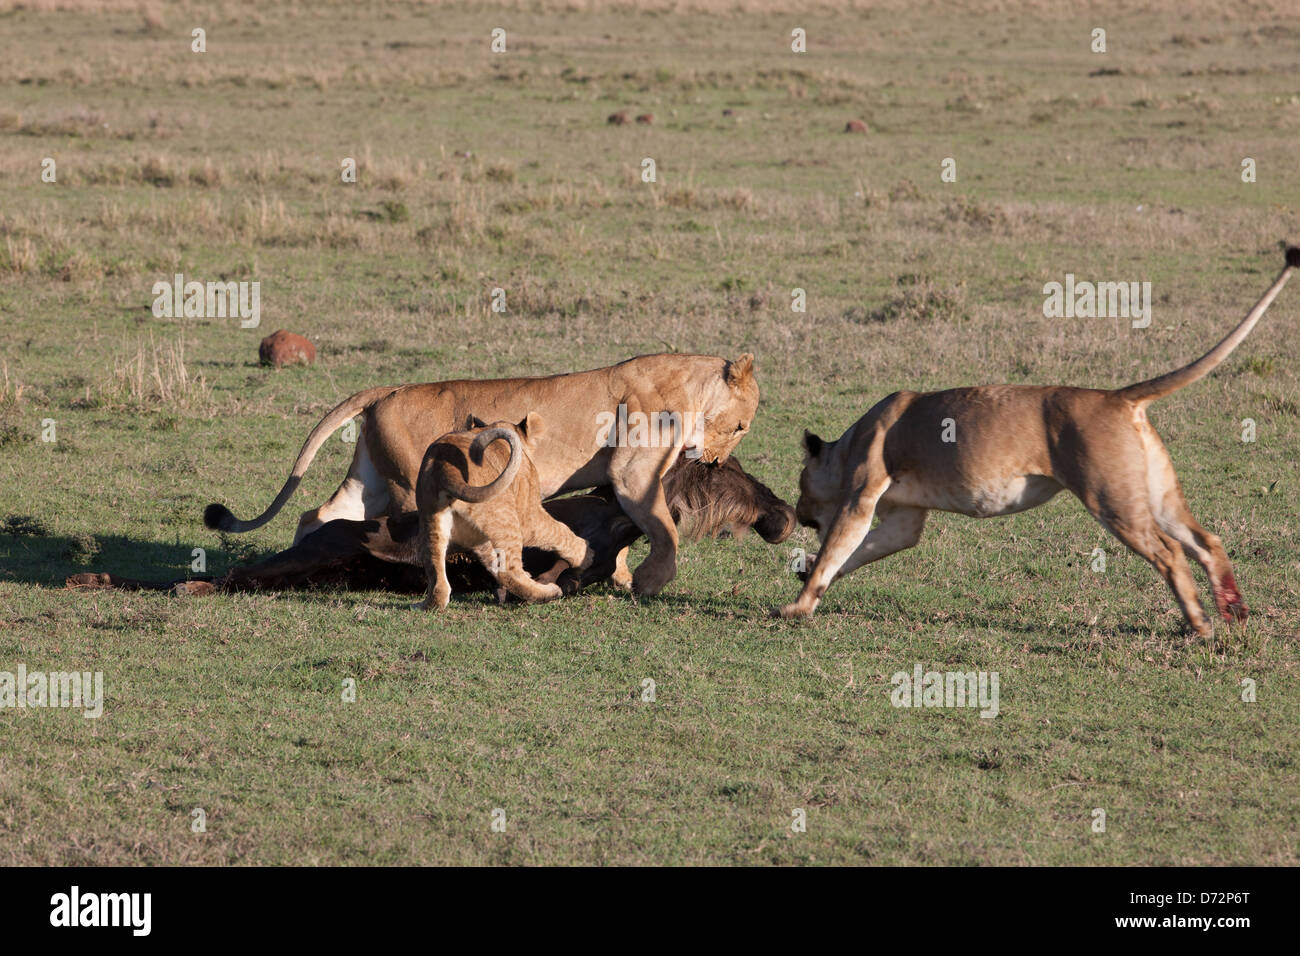 Lions and prey Stock Photo